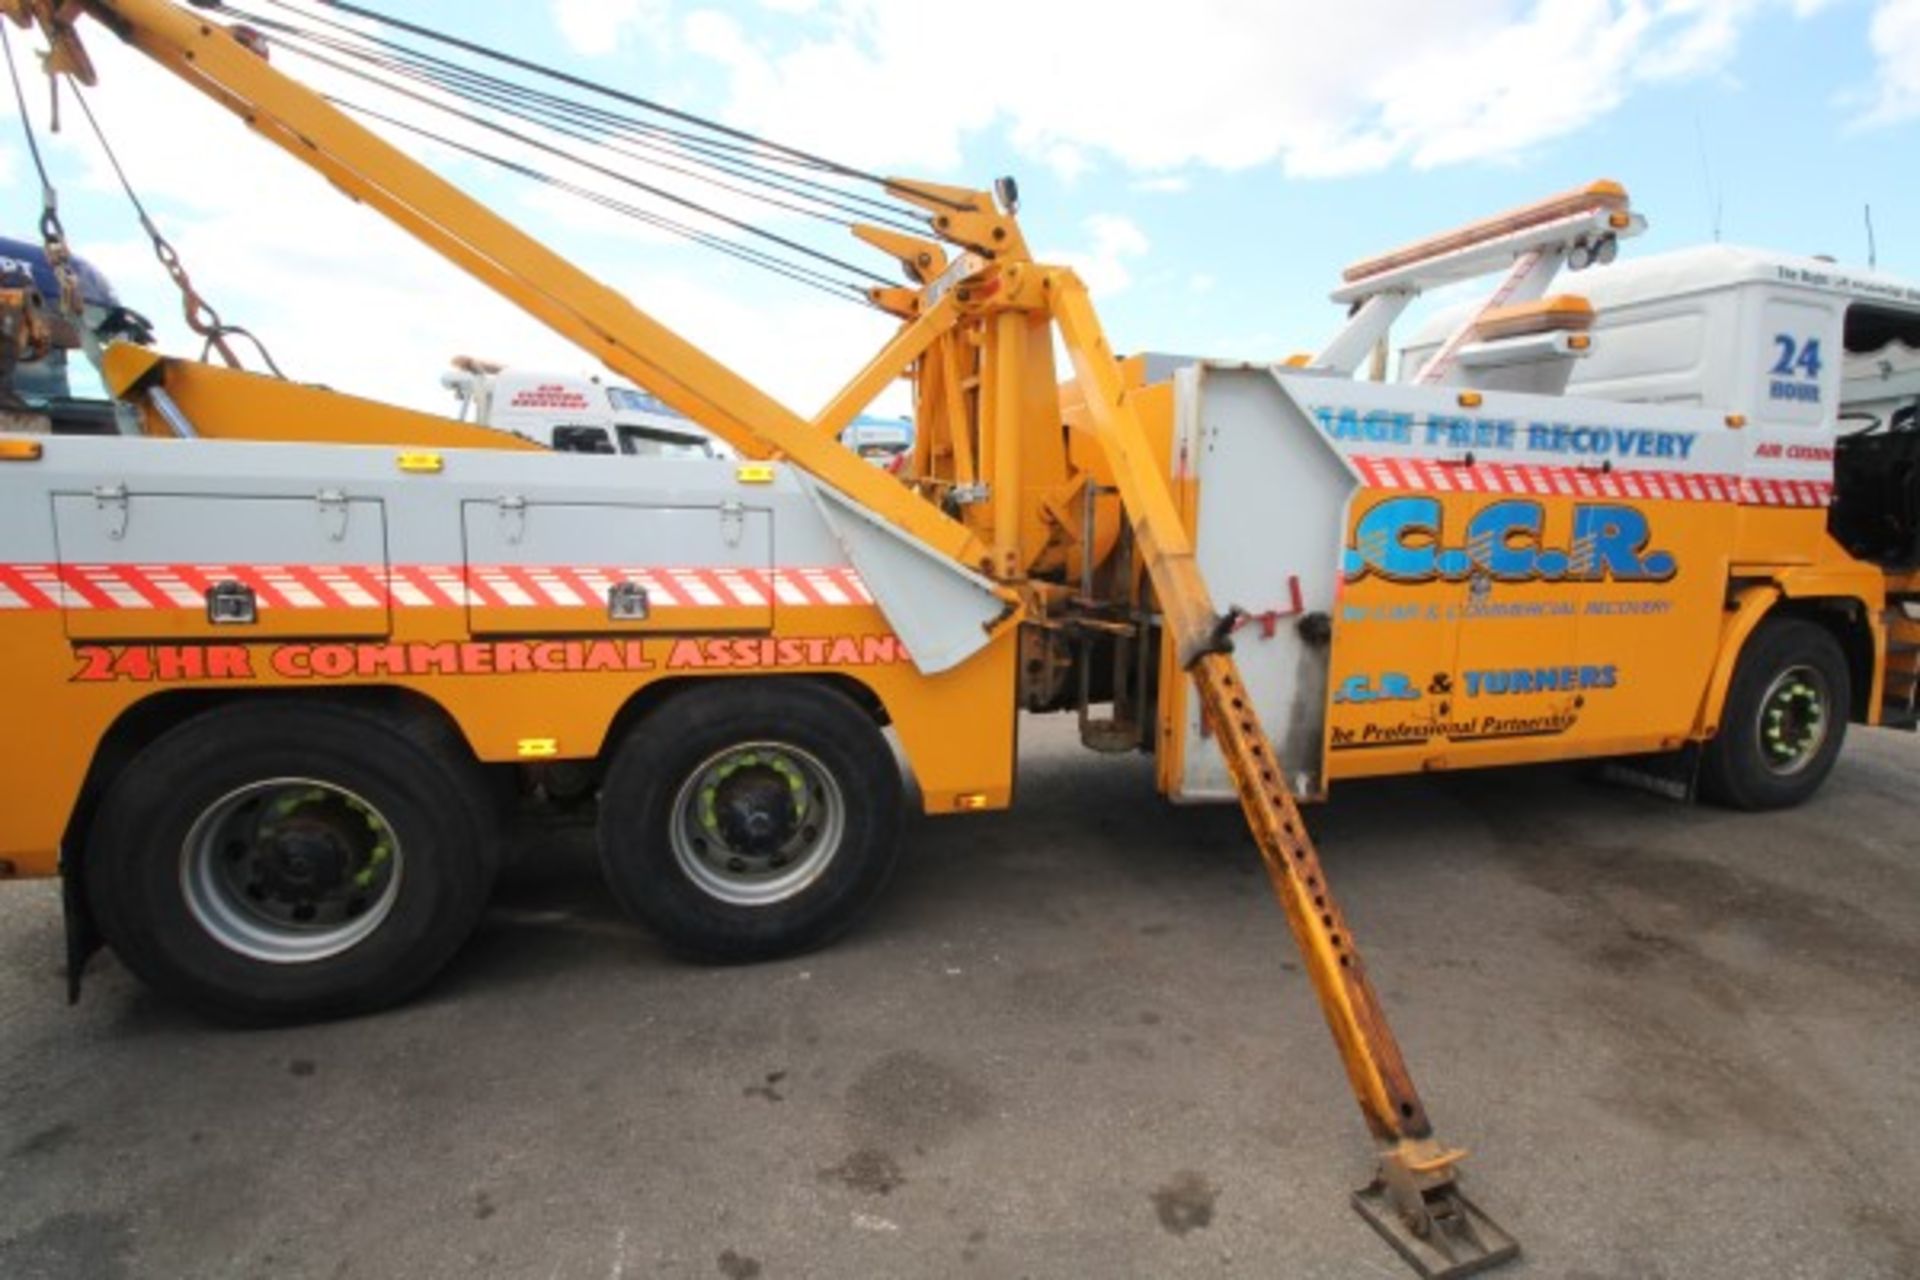 N444 TOW. 1996, MAN ECO240, 6x4 HEAVY DUTY UNDER LIFT RECOVERY TRUCK, 26-TONNE GROSS VEHICLE WEIGHT, - Image 14 of 31